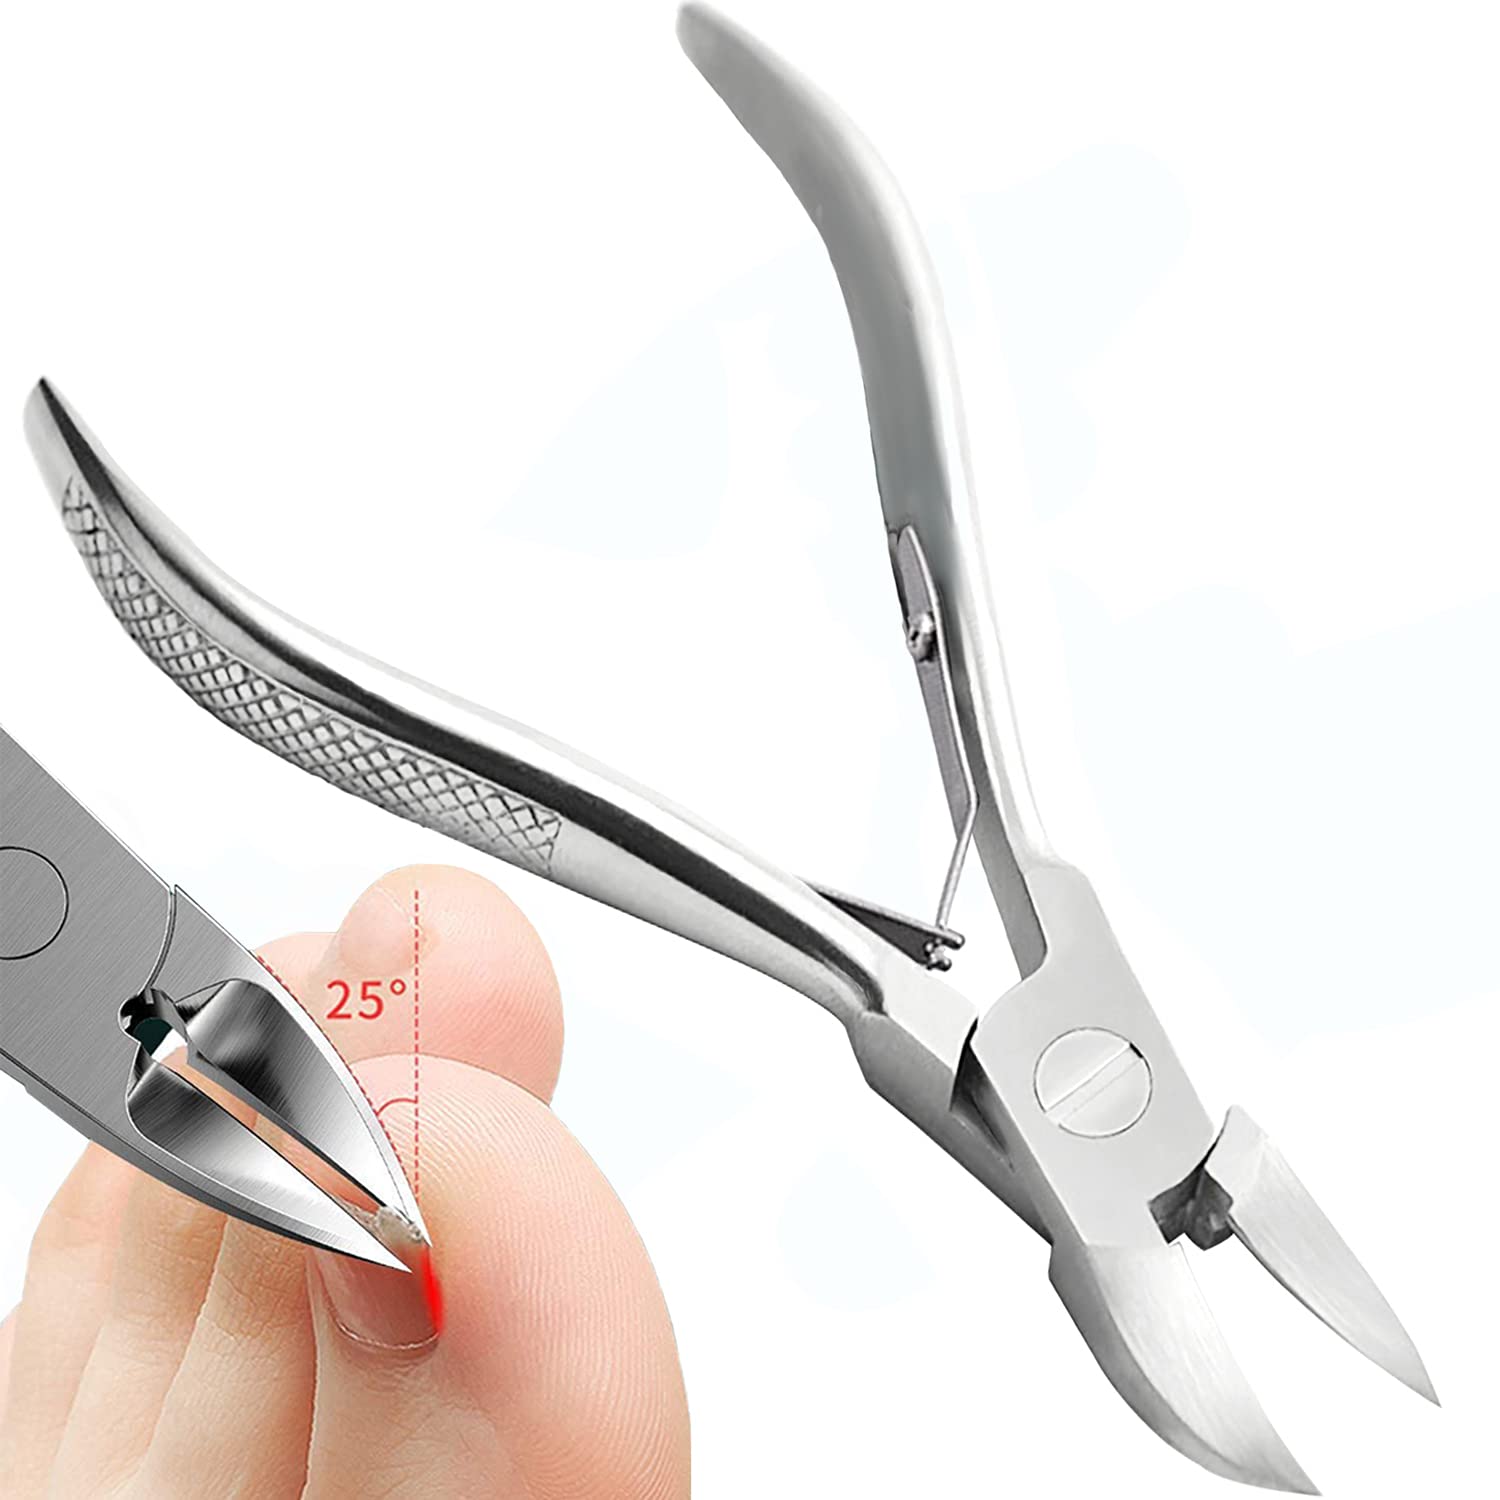 Thick Toenail Clippers, Nail Clippers for Thick & Ingrown Toenails